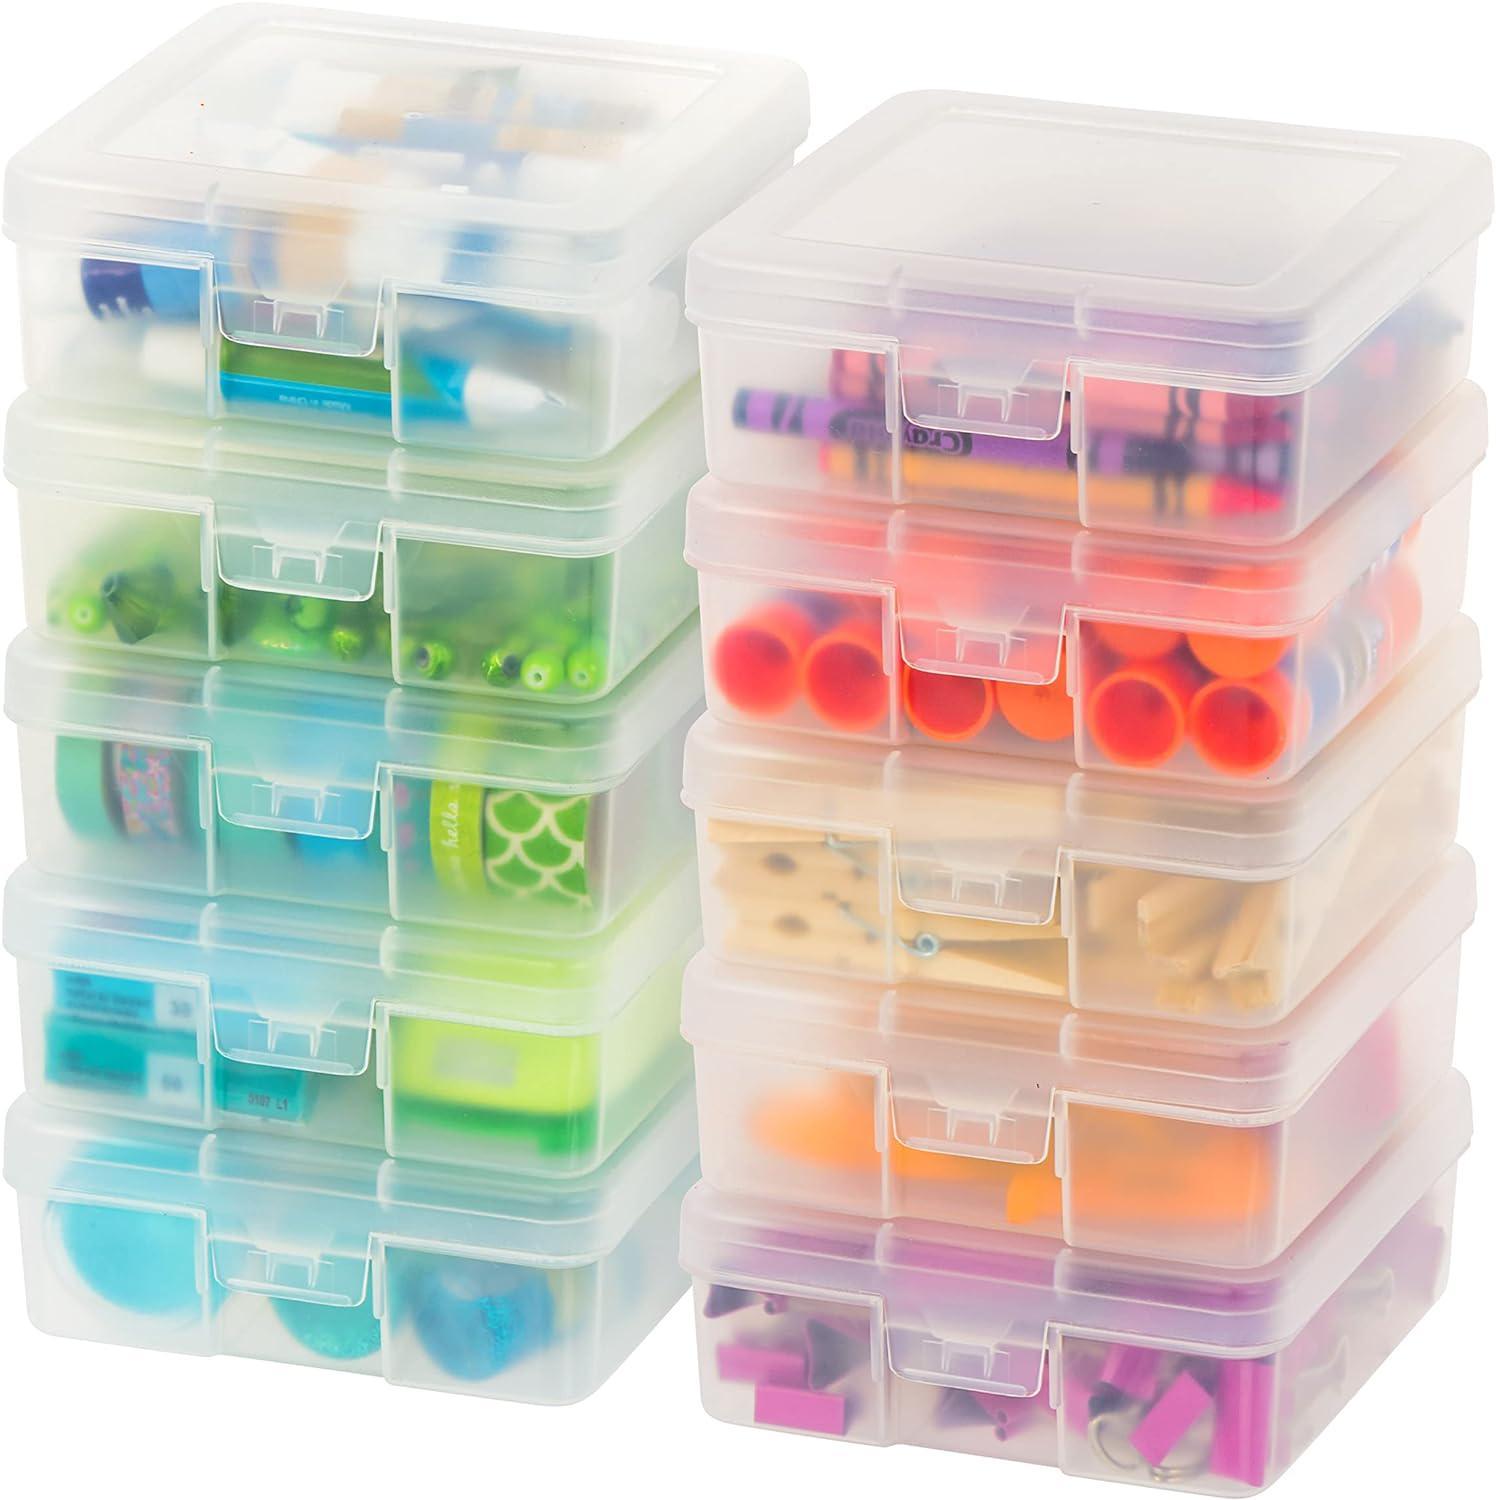 BTSKY Stack & Carry Box, Clear Plastic Storage Container Stackable